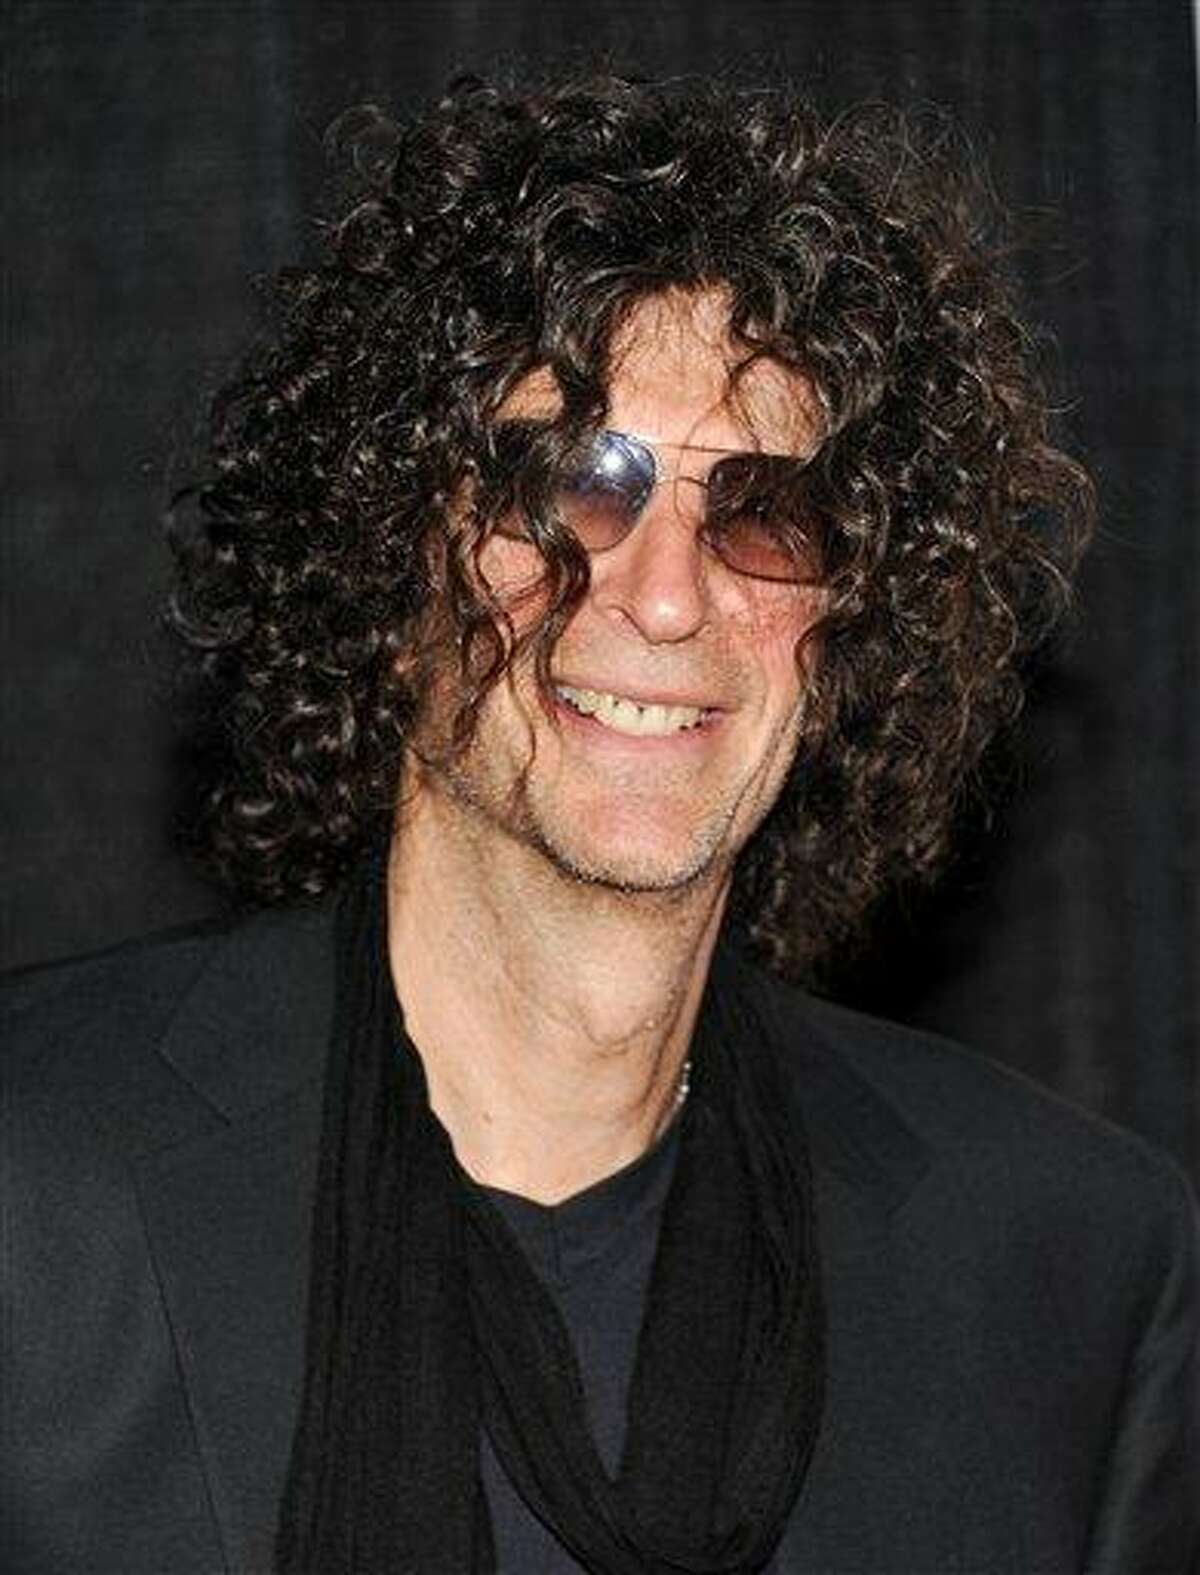 FILE - In a Dec. 1, 2010 file photo, Howard Stern attends the Quentin Tarantino Friars Club Roast at the New York Hilton Hotel in New York. Stern announced Thursday, Dec. 9, 2010 that he has signed a new 5-year contract with SiriusXM Radio. (AP Photo/Evan Agostini)